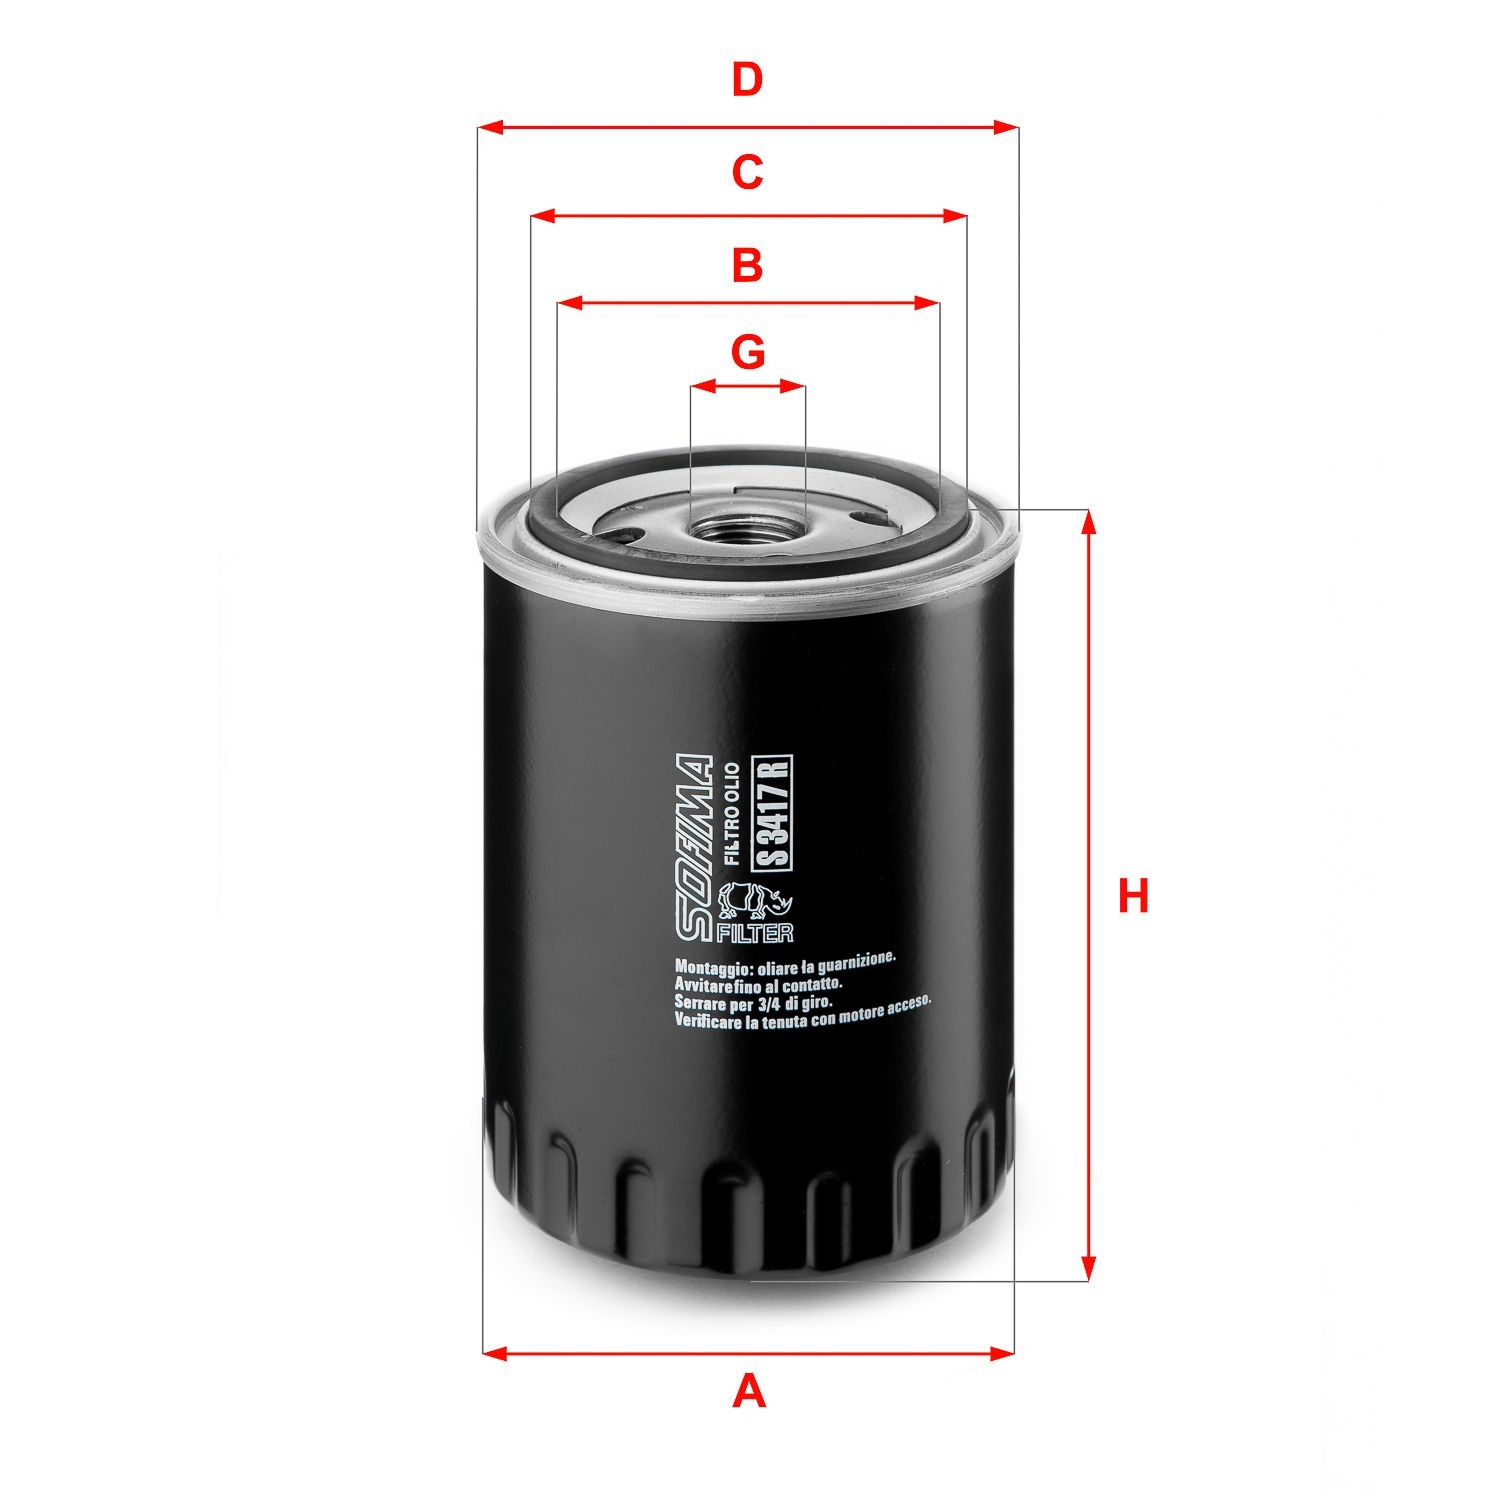 SOFIMA S 3417 R Oil filter 3/4-16 UNF, with one anti-return valve, Spin-on Filter